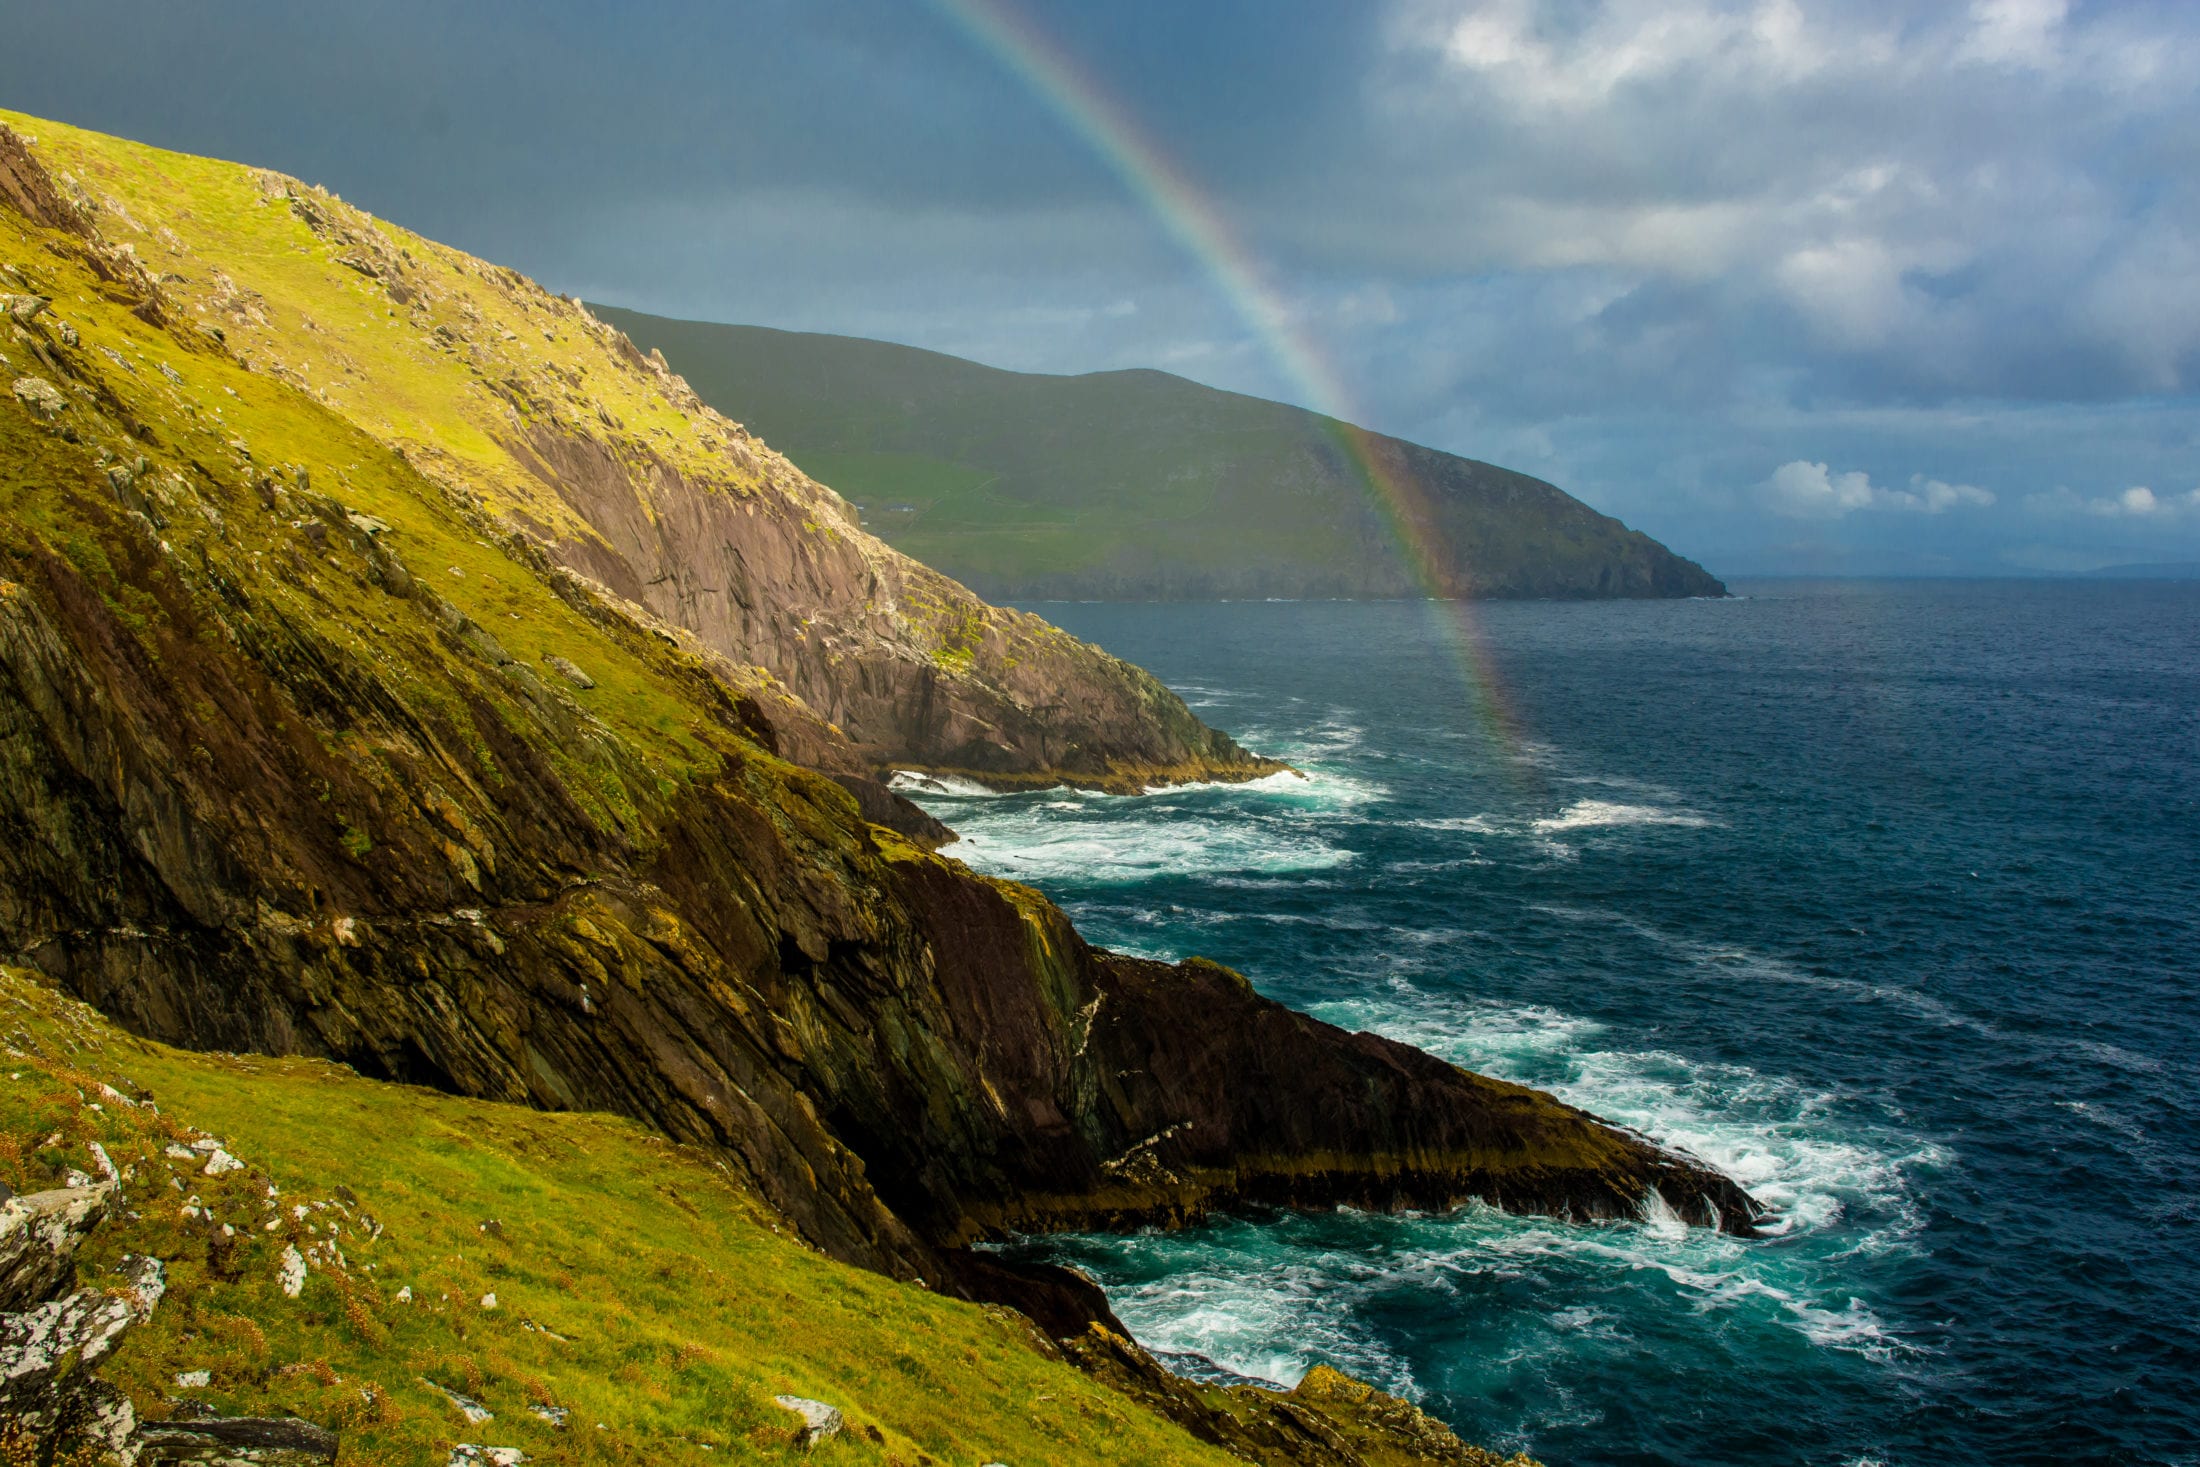 Join us for Irish Literature in the Fall and see Ireland with new eyes!